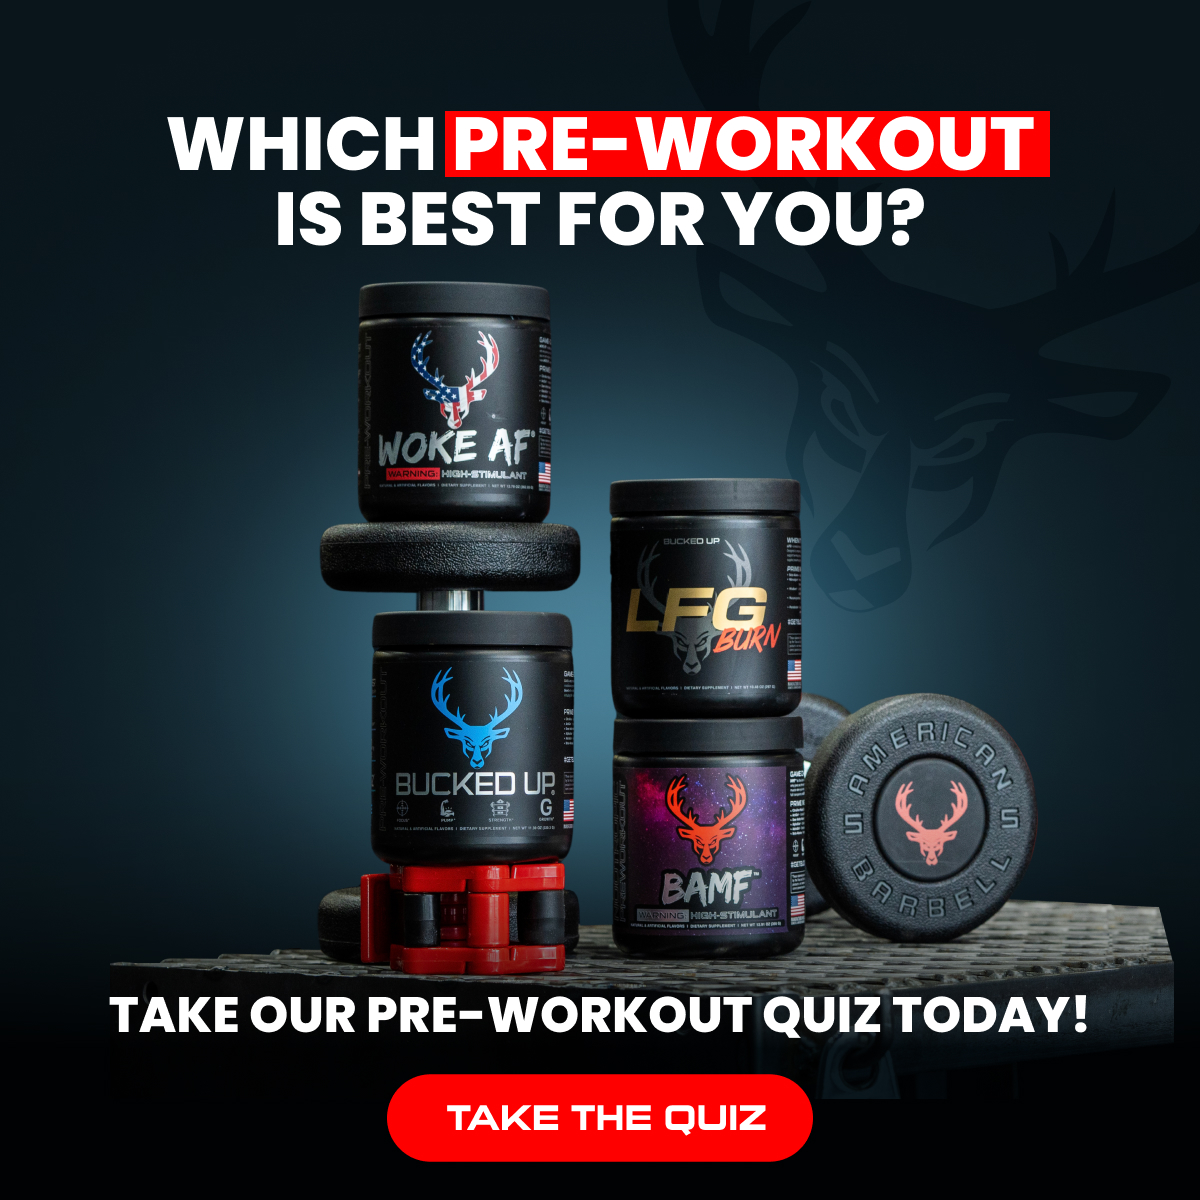 Pre Workout Quiz-text reads "which pre-workout is best for you? Take our pre-workout quiz today!" Button reads: "Take the quiz" Image is of Woke AF Pre-workout, LFG pre-workout, Bucked Up Pre-workout and BAMF Pre-workout, surrounded by